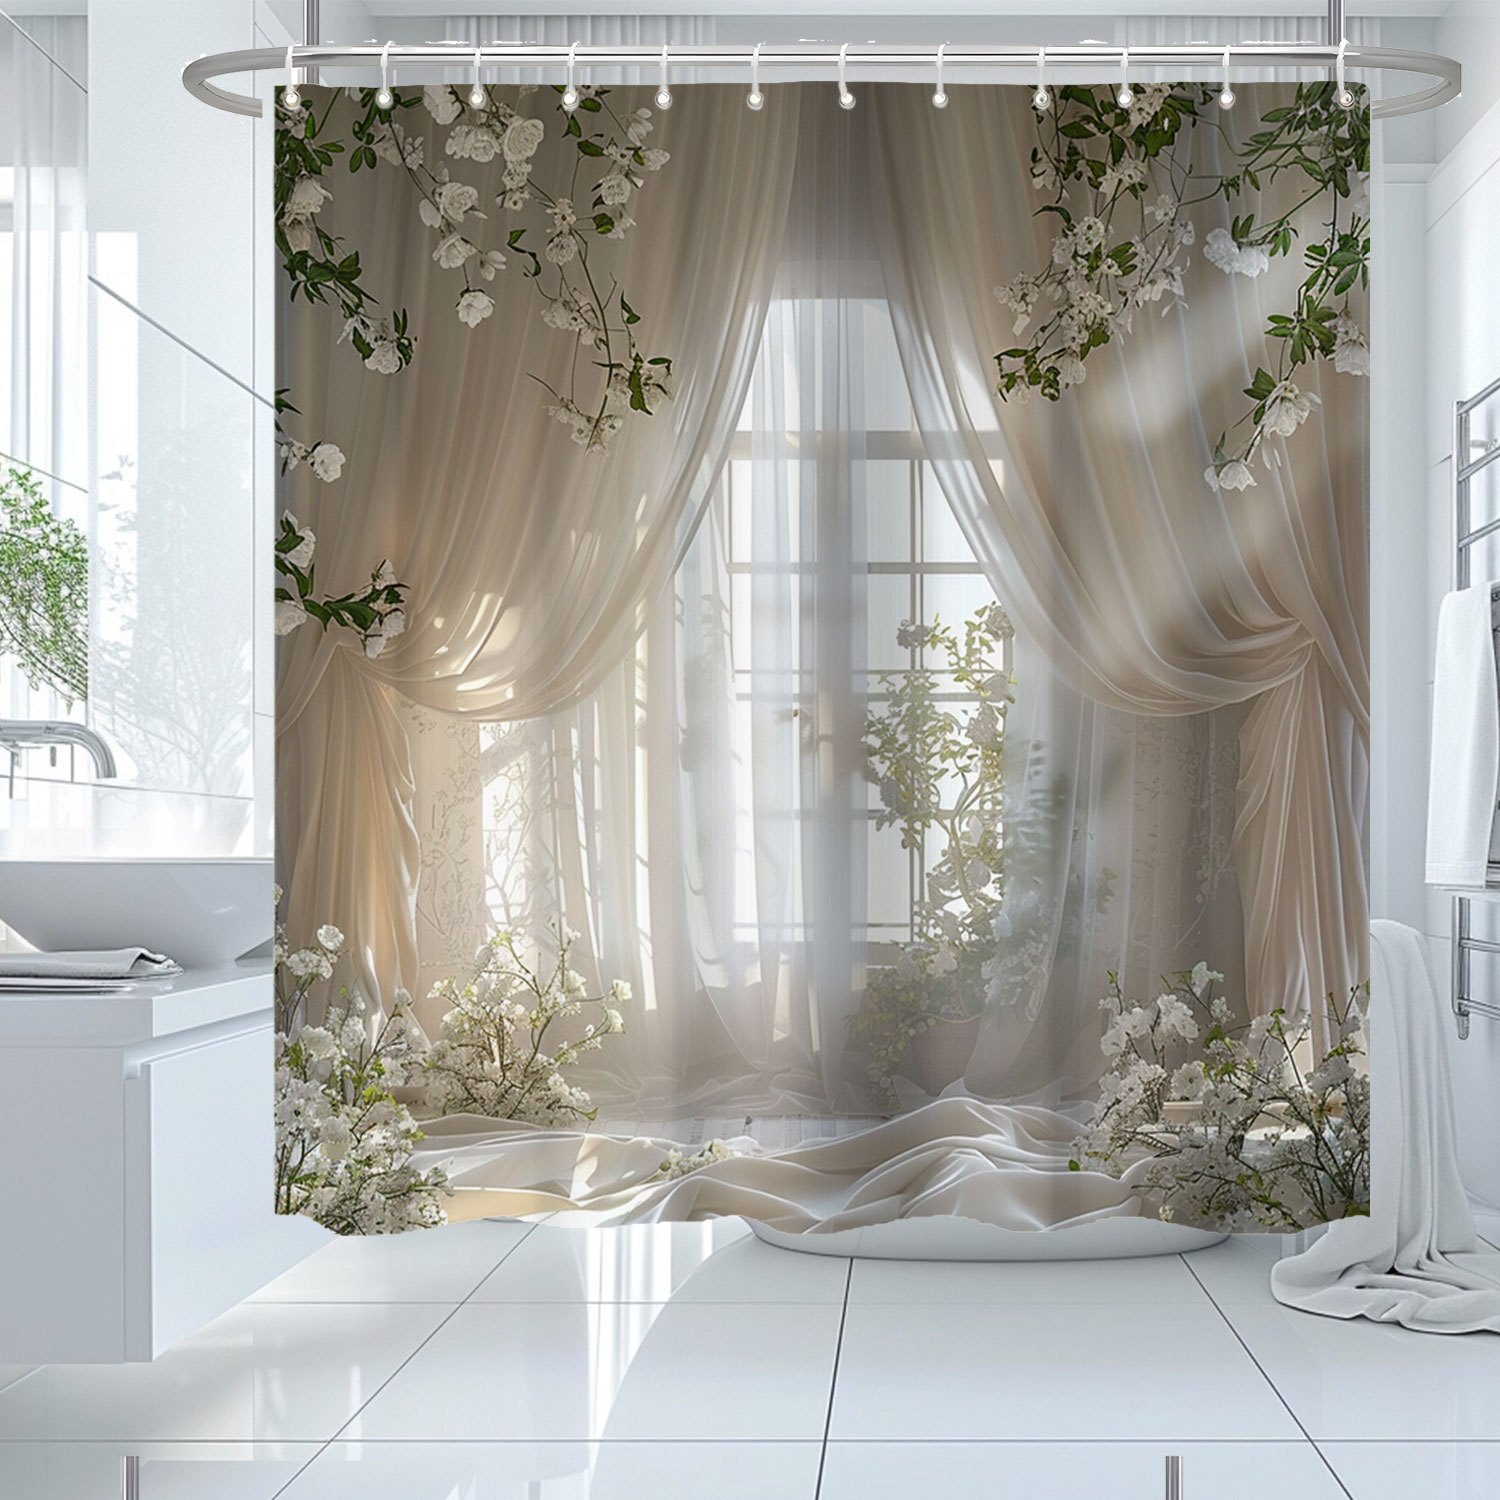 

Dreamy White Window Floral Scenery Water-resistant Shower Curtain With 12 Hooks, Artistic Polyester Bath Decor, Woven Fabric, Hook-accessory Included, 71x71 Inch - Easy Care, No-bleach Wash